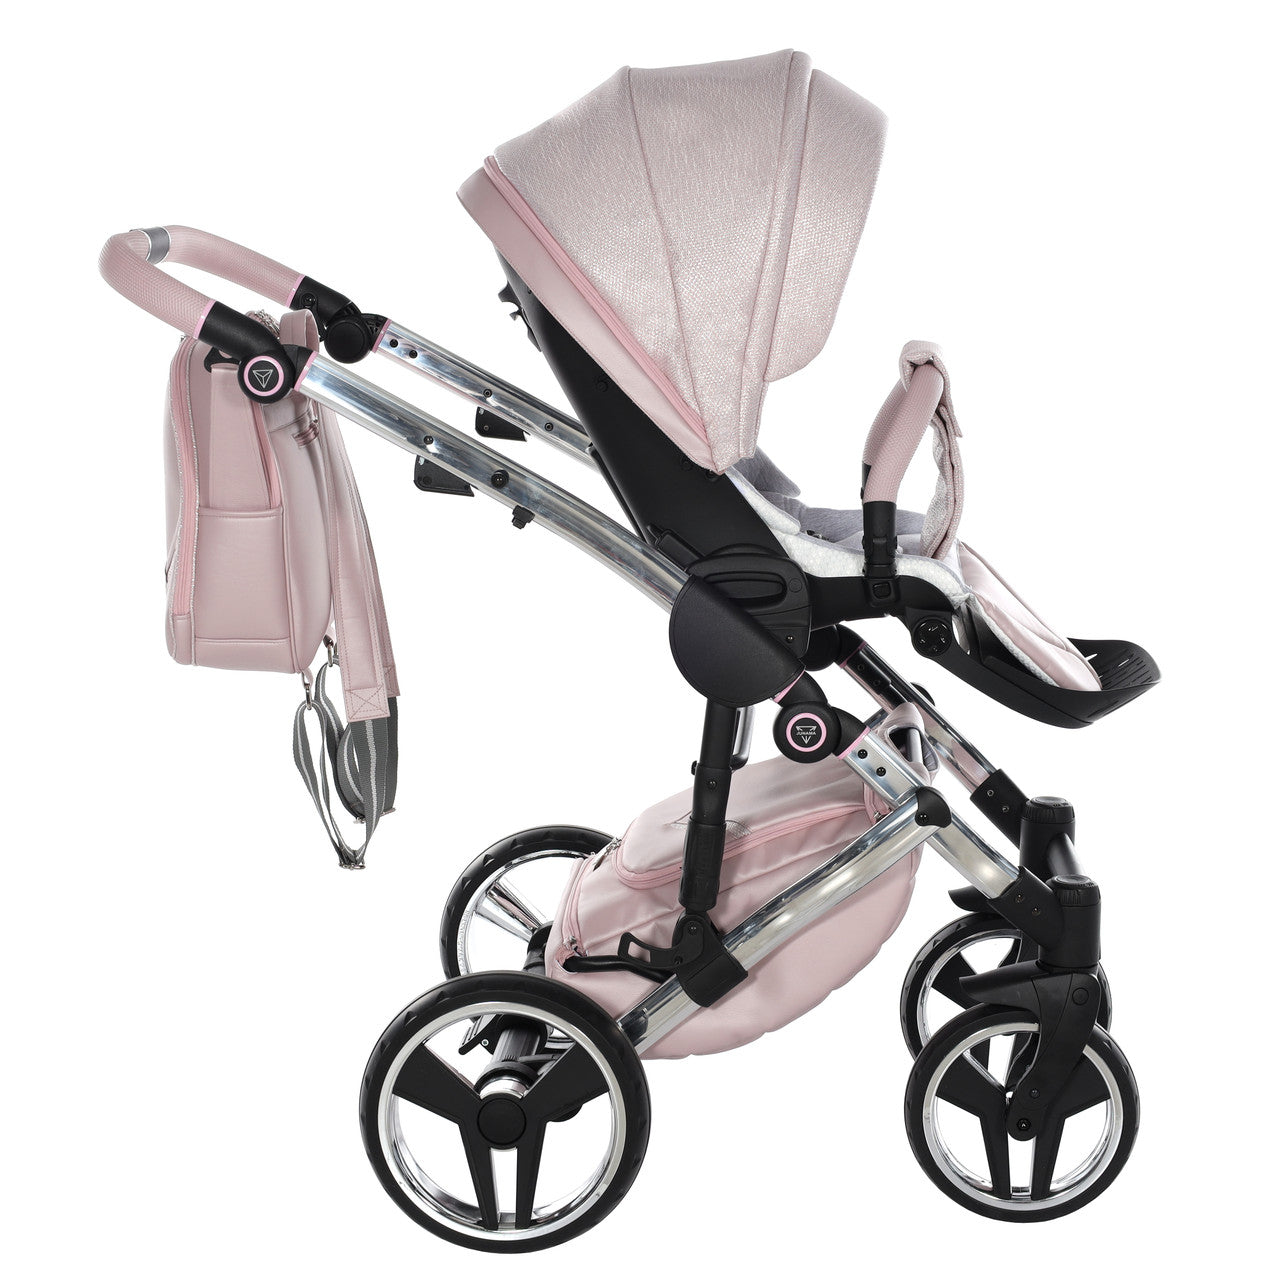 Ex Display Junama S-Class Dolce 3 in 1 Travel System - Pink